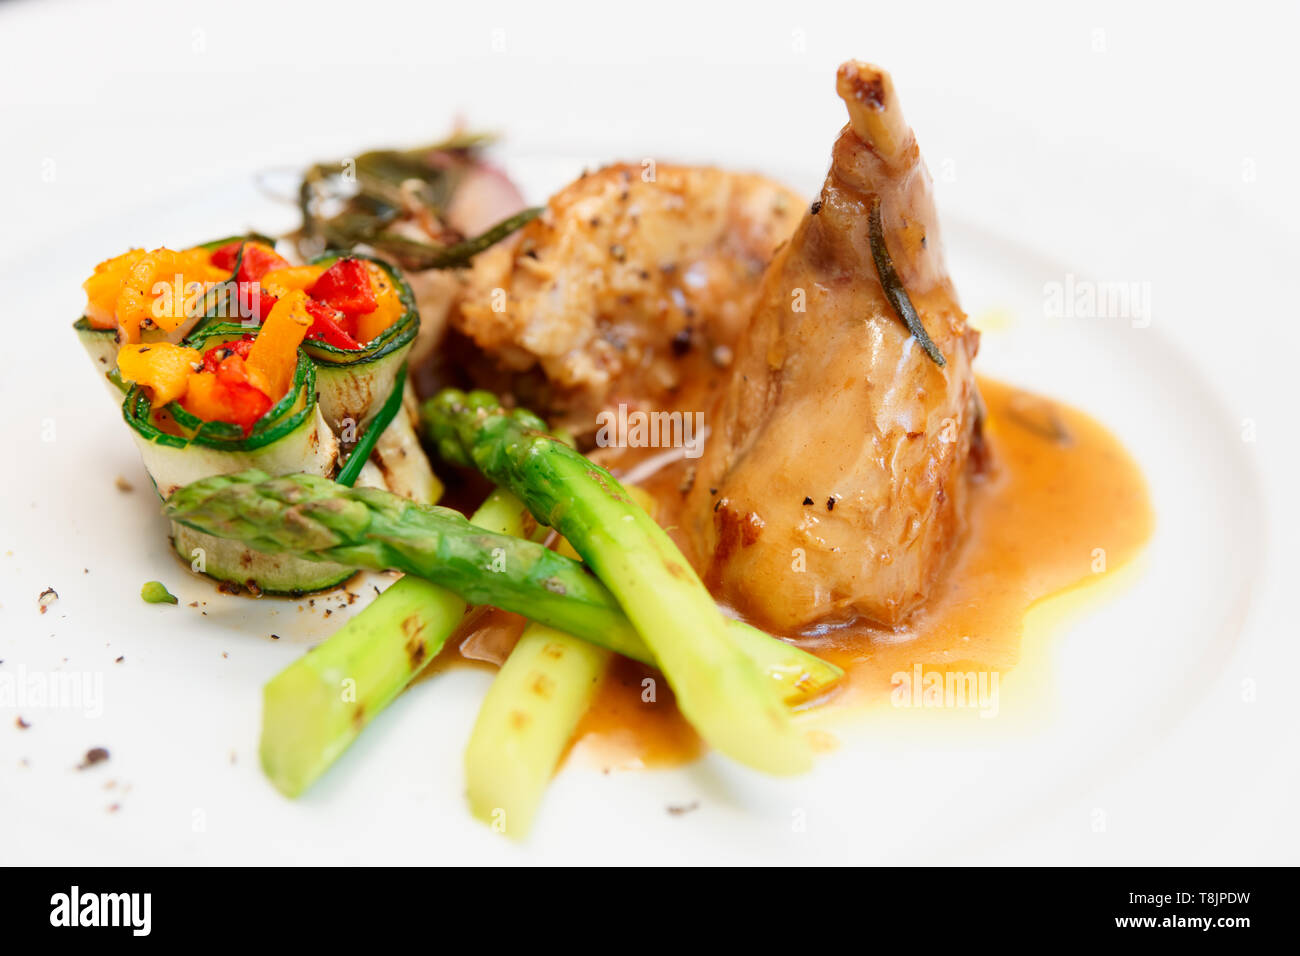 Rabbit stew with vegetables on plate Stock Photo - Alamy